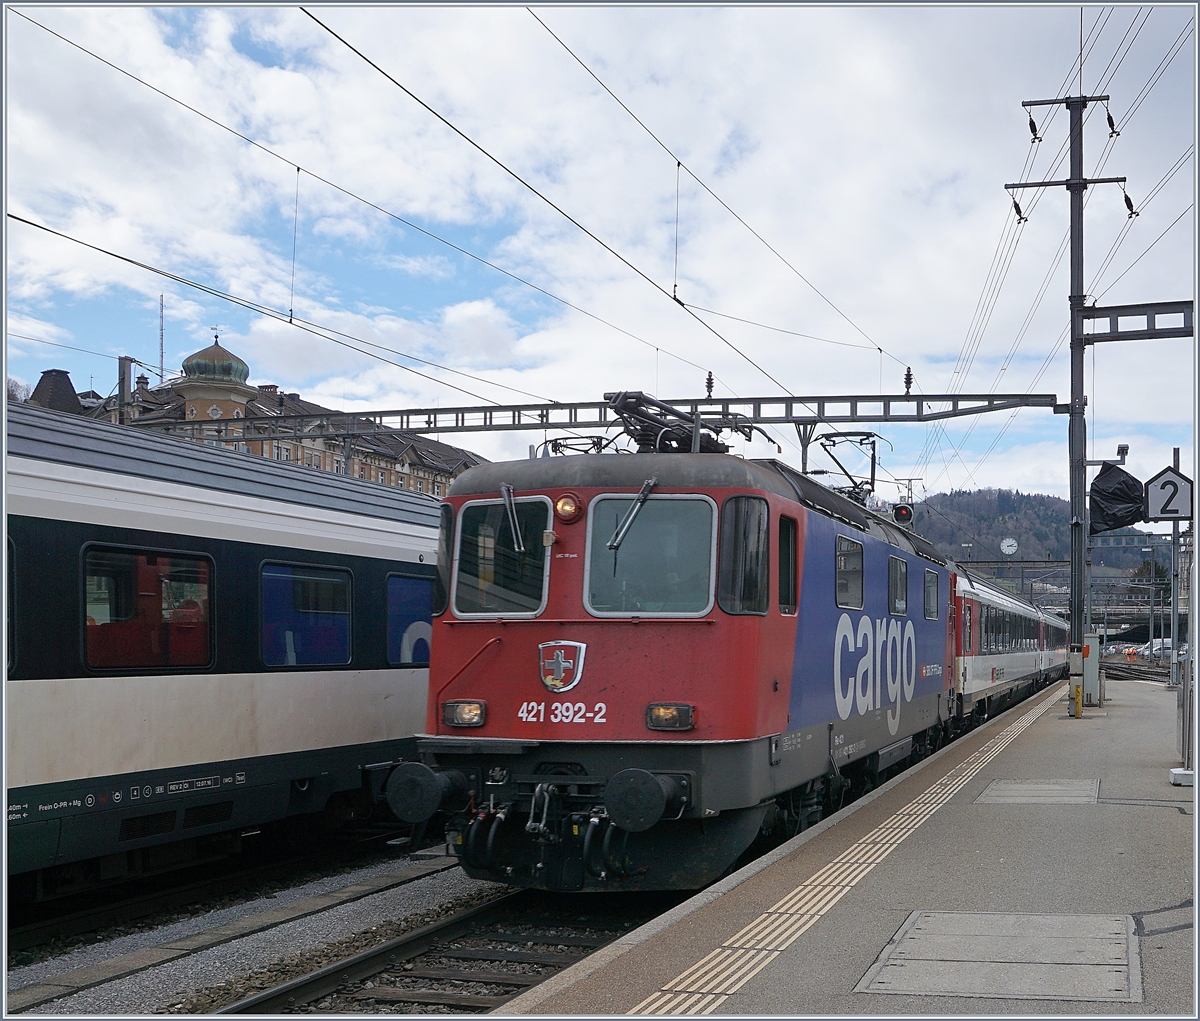 The SBB Re 421 392-2 with an EC to München in St Gallen.
16.03.2018